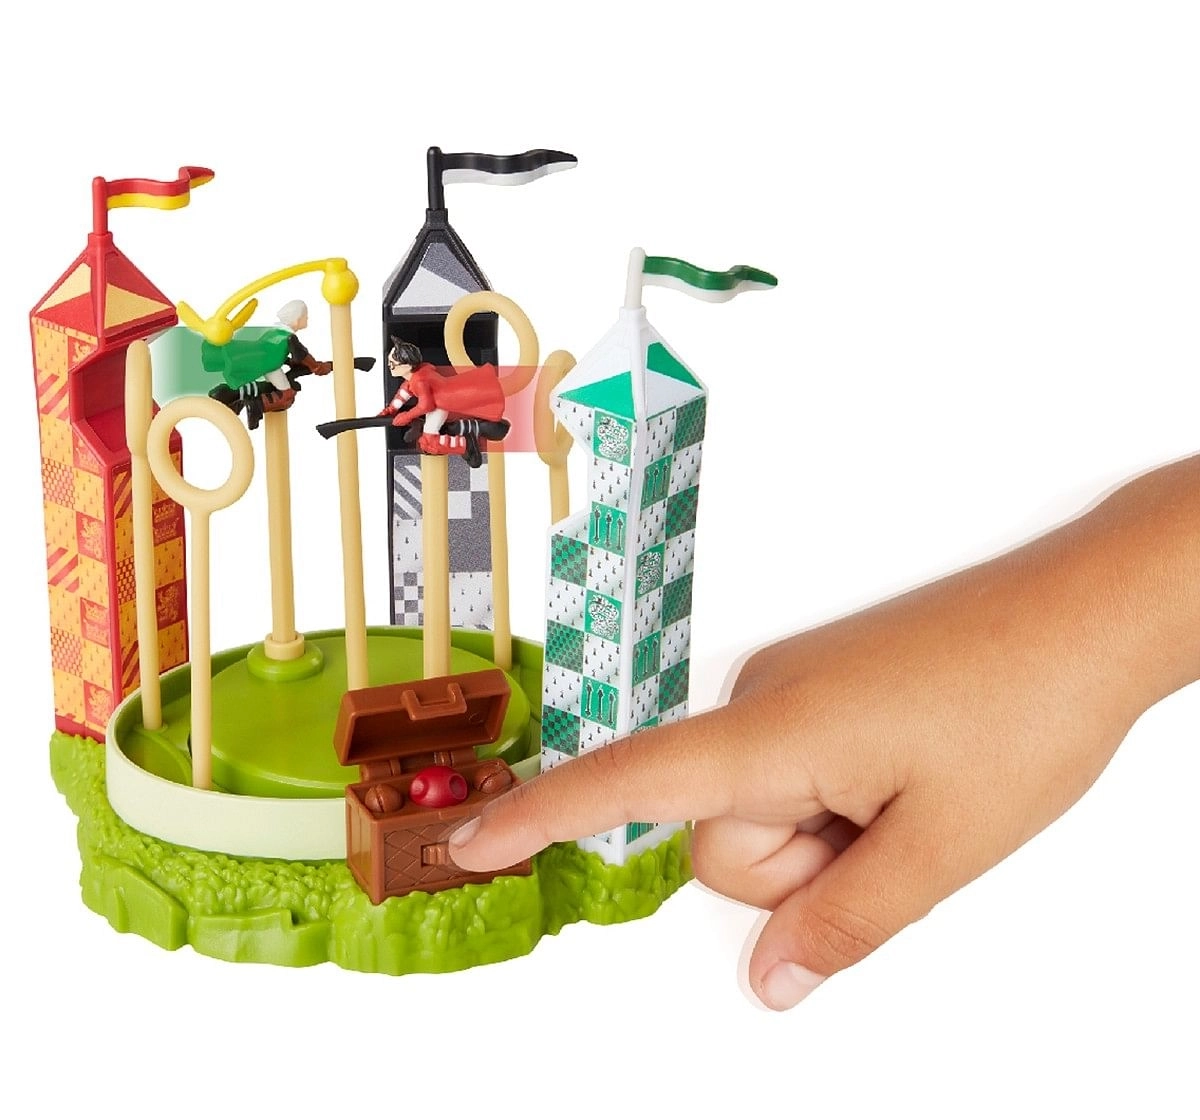 Harry Potter Quidditch Pitch Mini Playsets,  4Y+ (Multicolor)